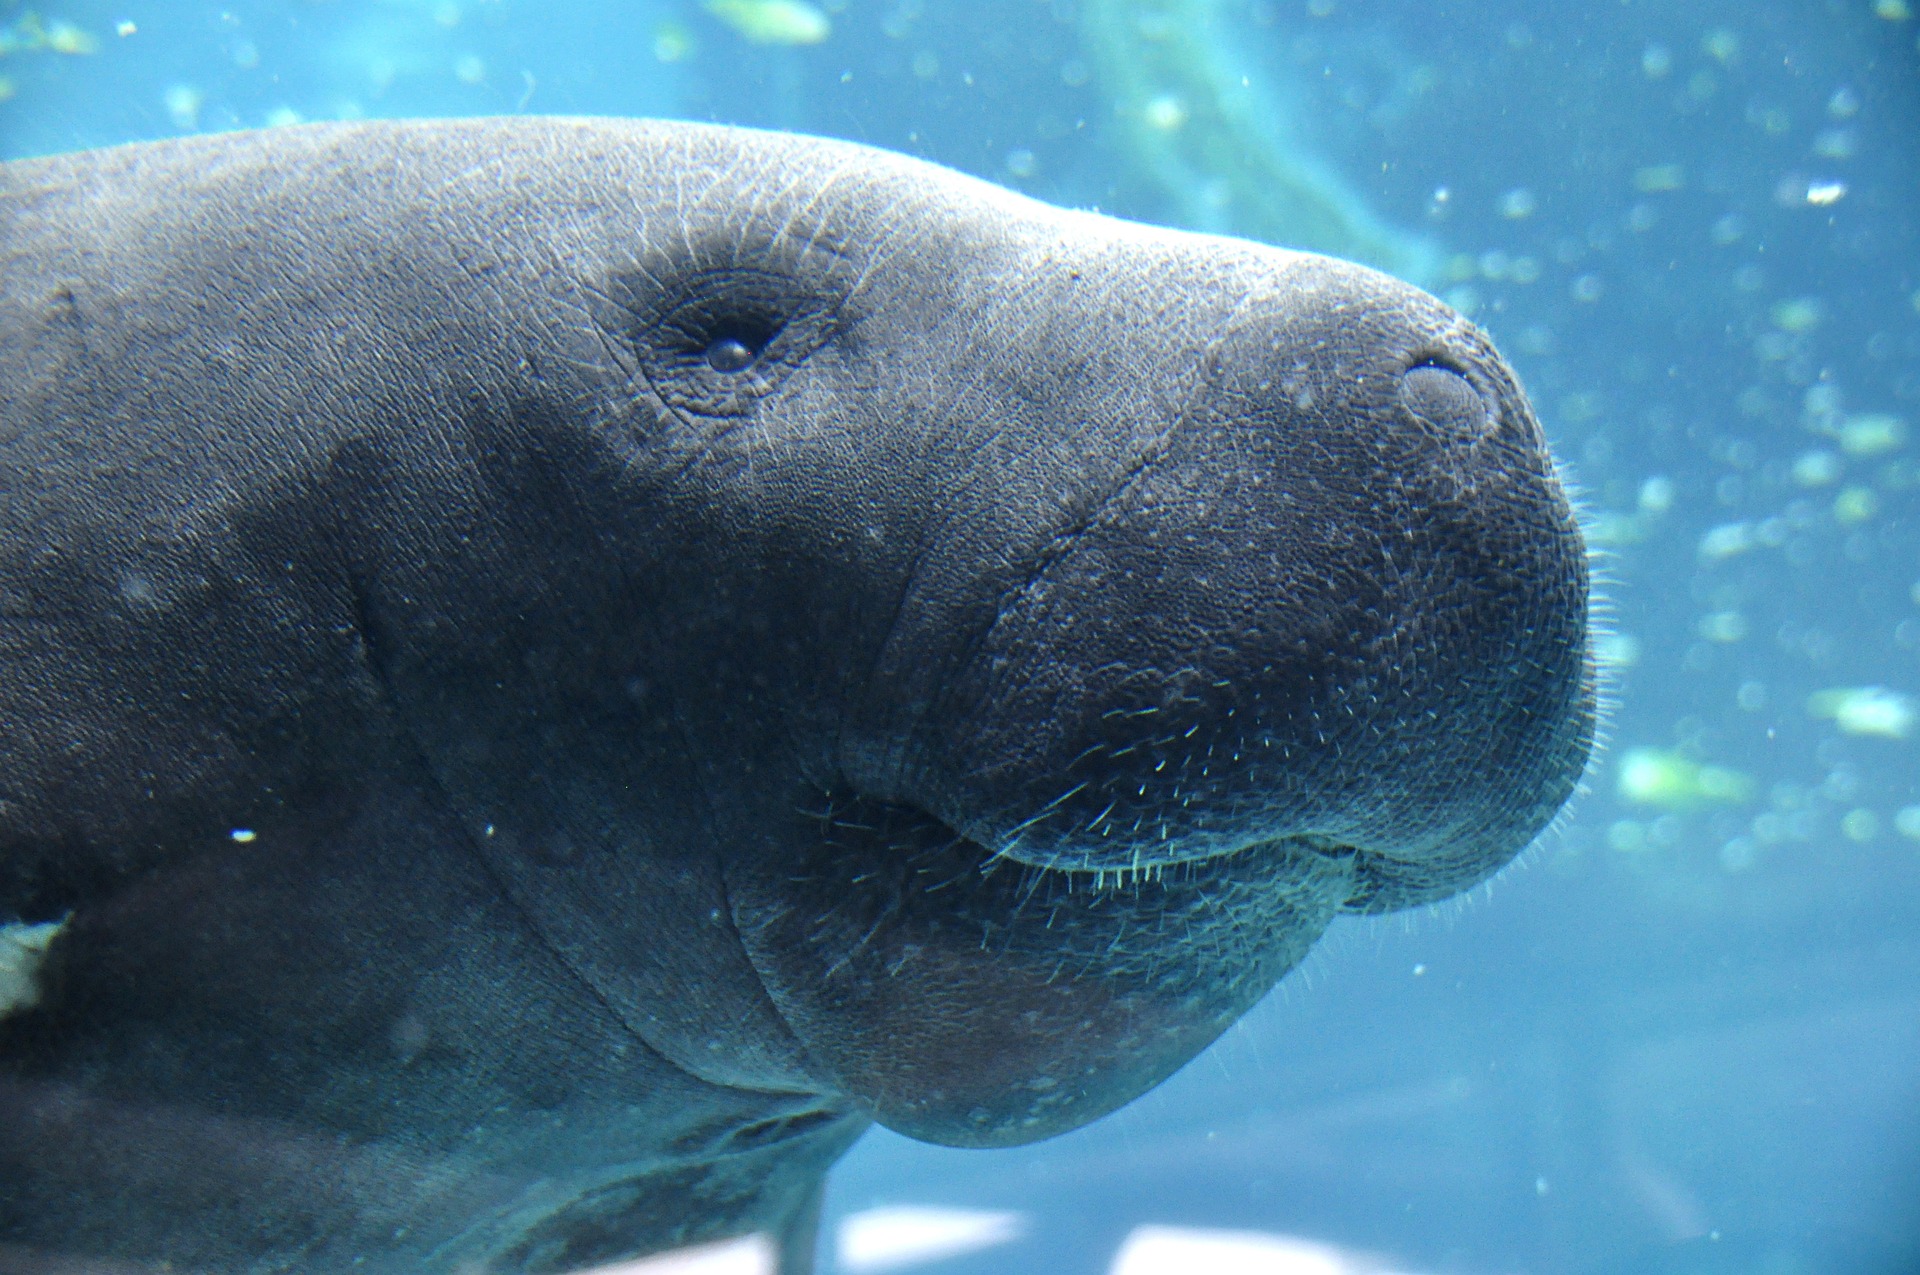 Face of a manatee that sailors mistook for a mermaid in the Caribbean